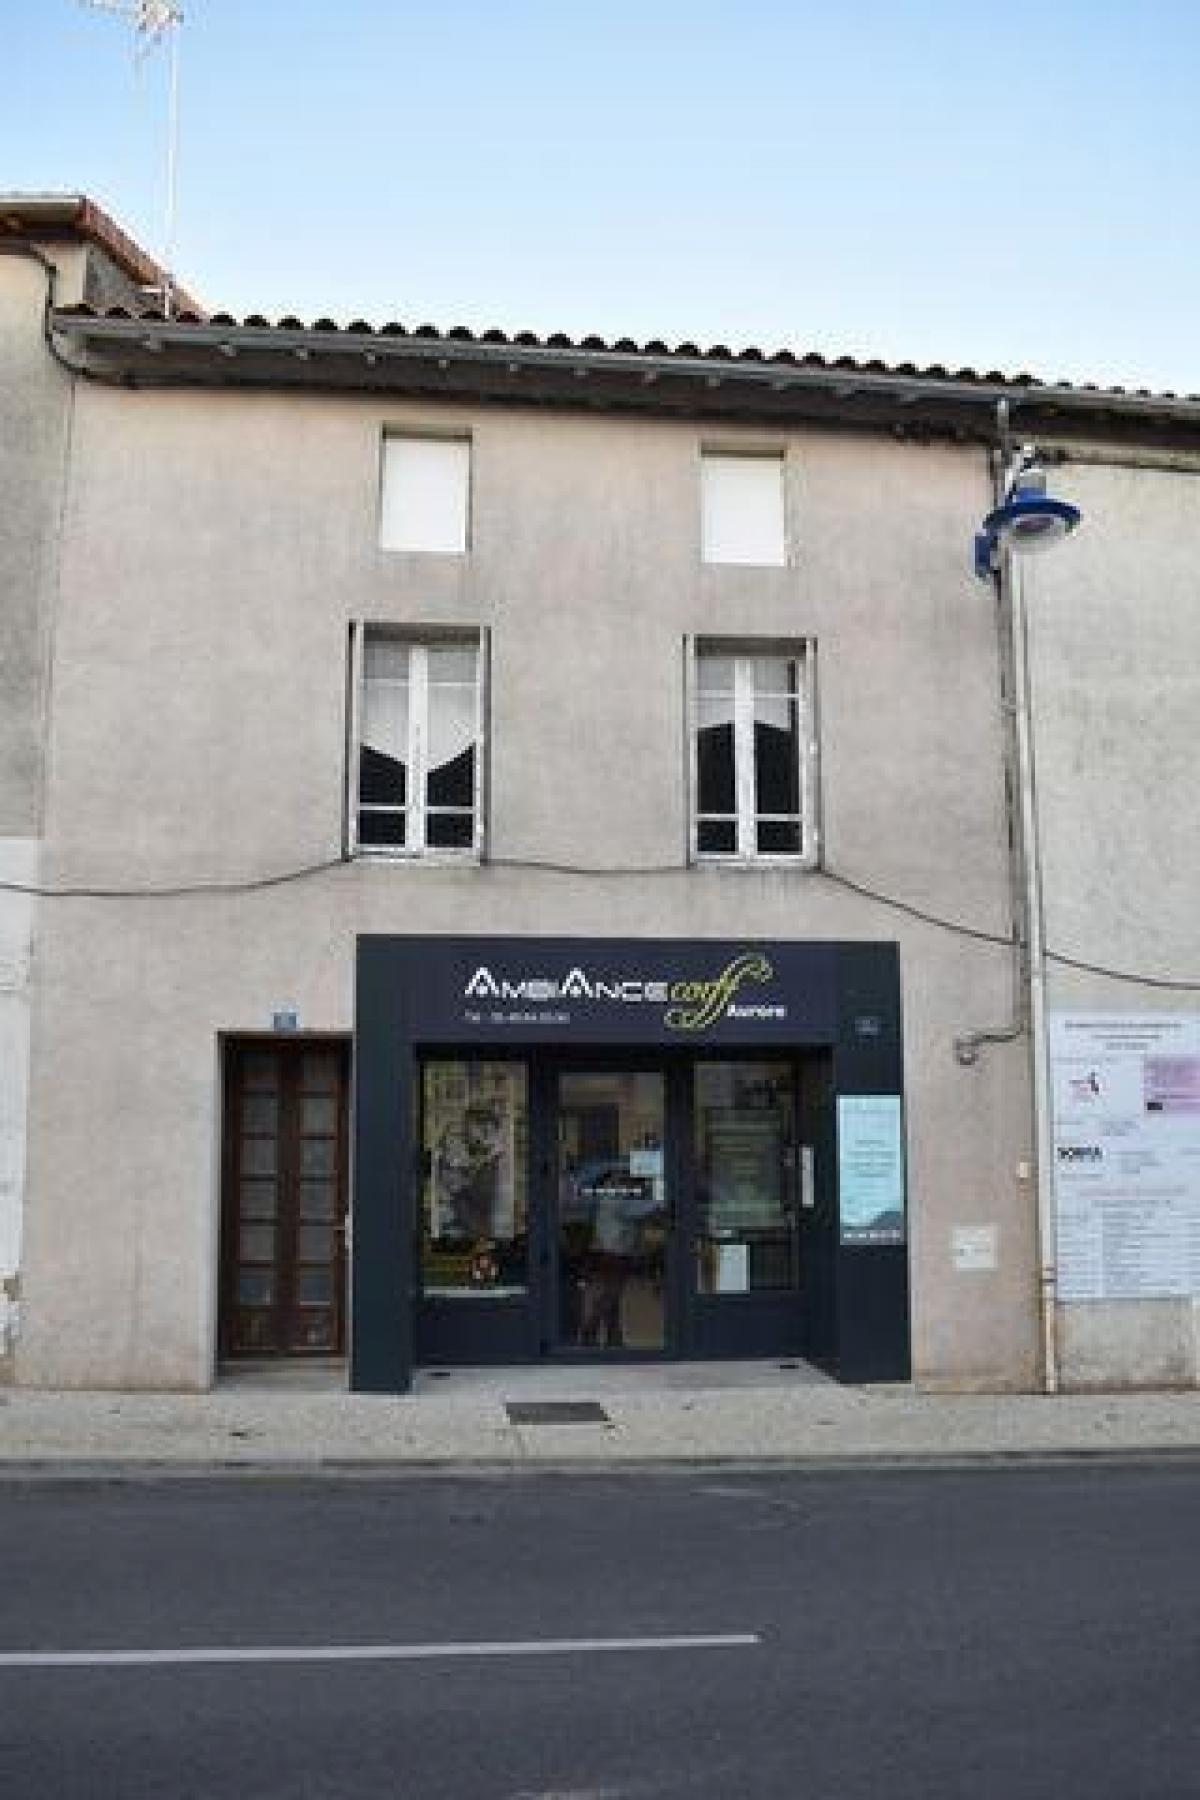 Picture of Office For Sale in Thenezay, Poitou Charentes, France